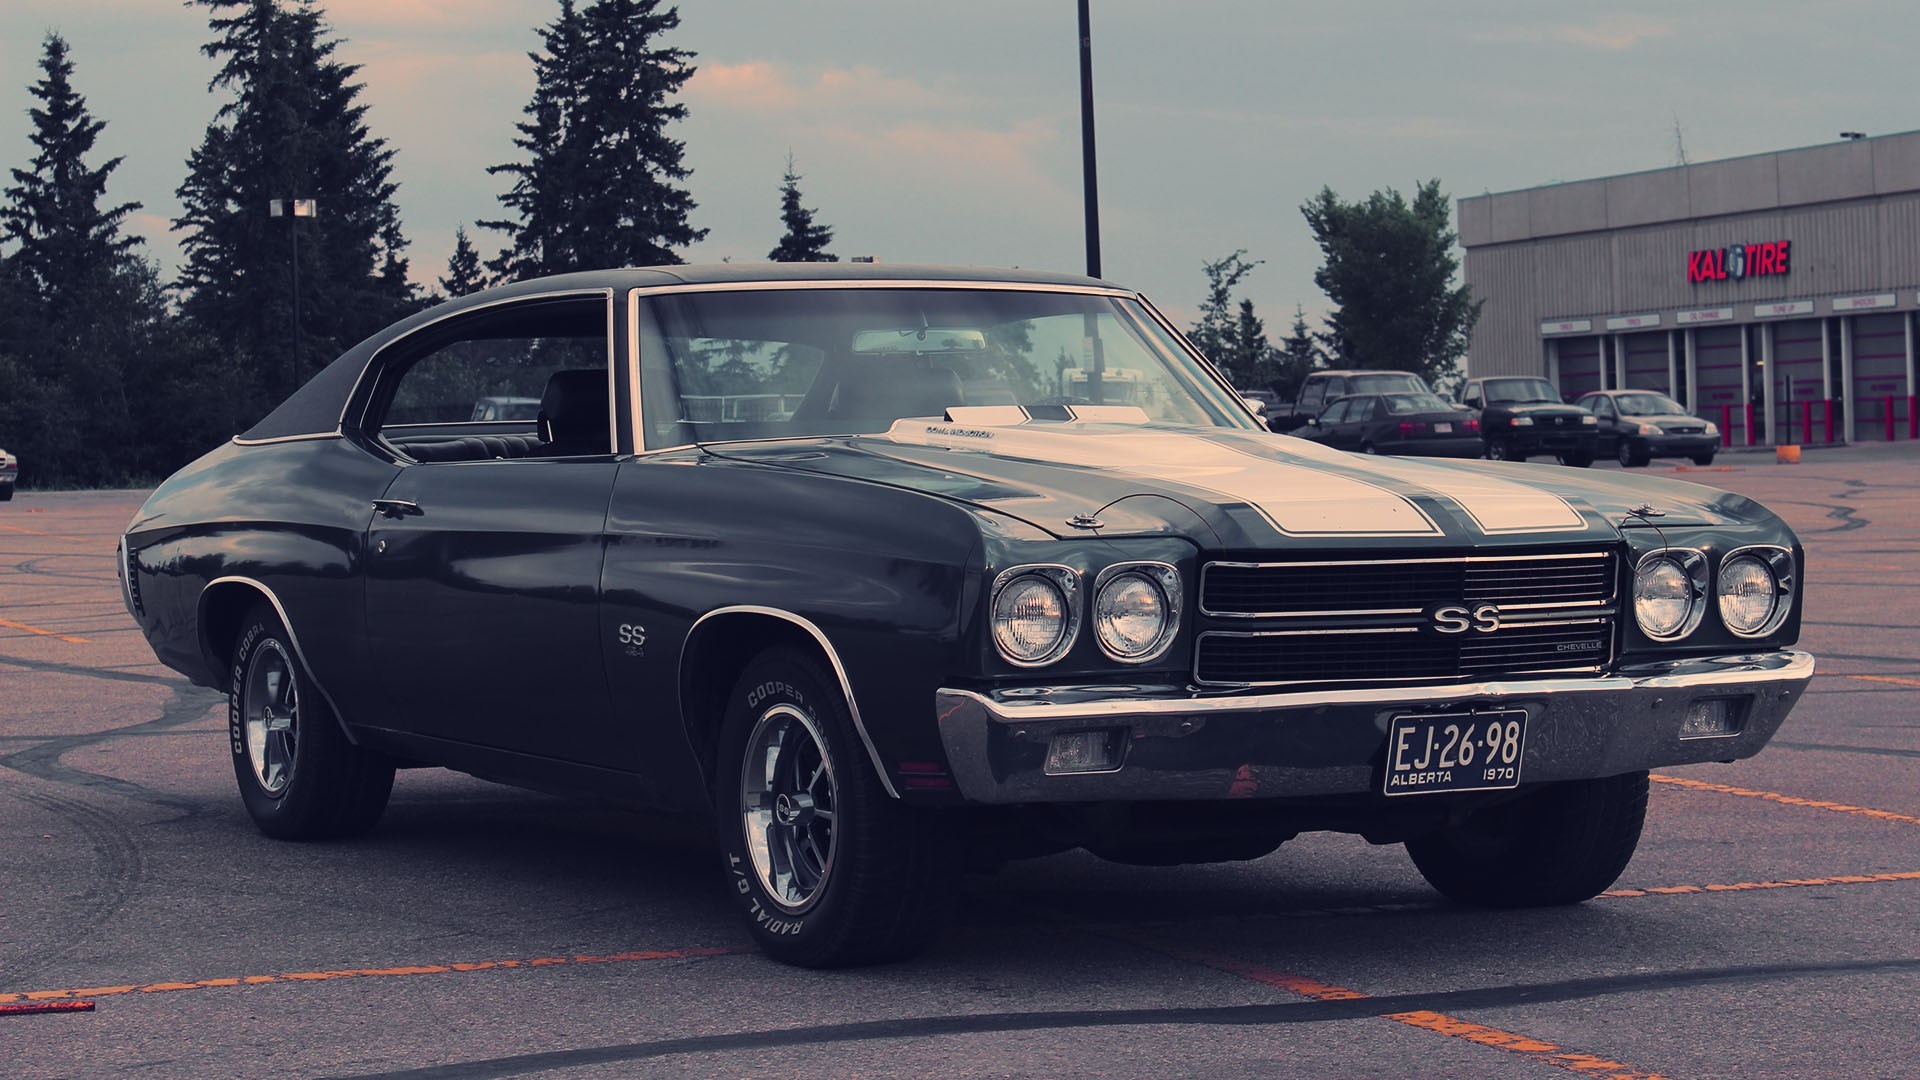 Chevrolet Chevelle collection, Classic car showcase, Muscle car gallery, Vintage pedigree, Automotive enthusiasts, 1920x1080 Full HD Desktop